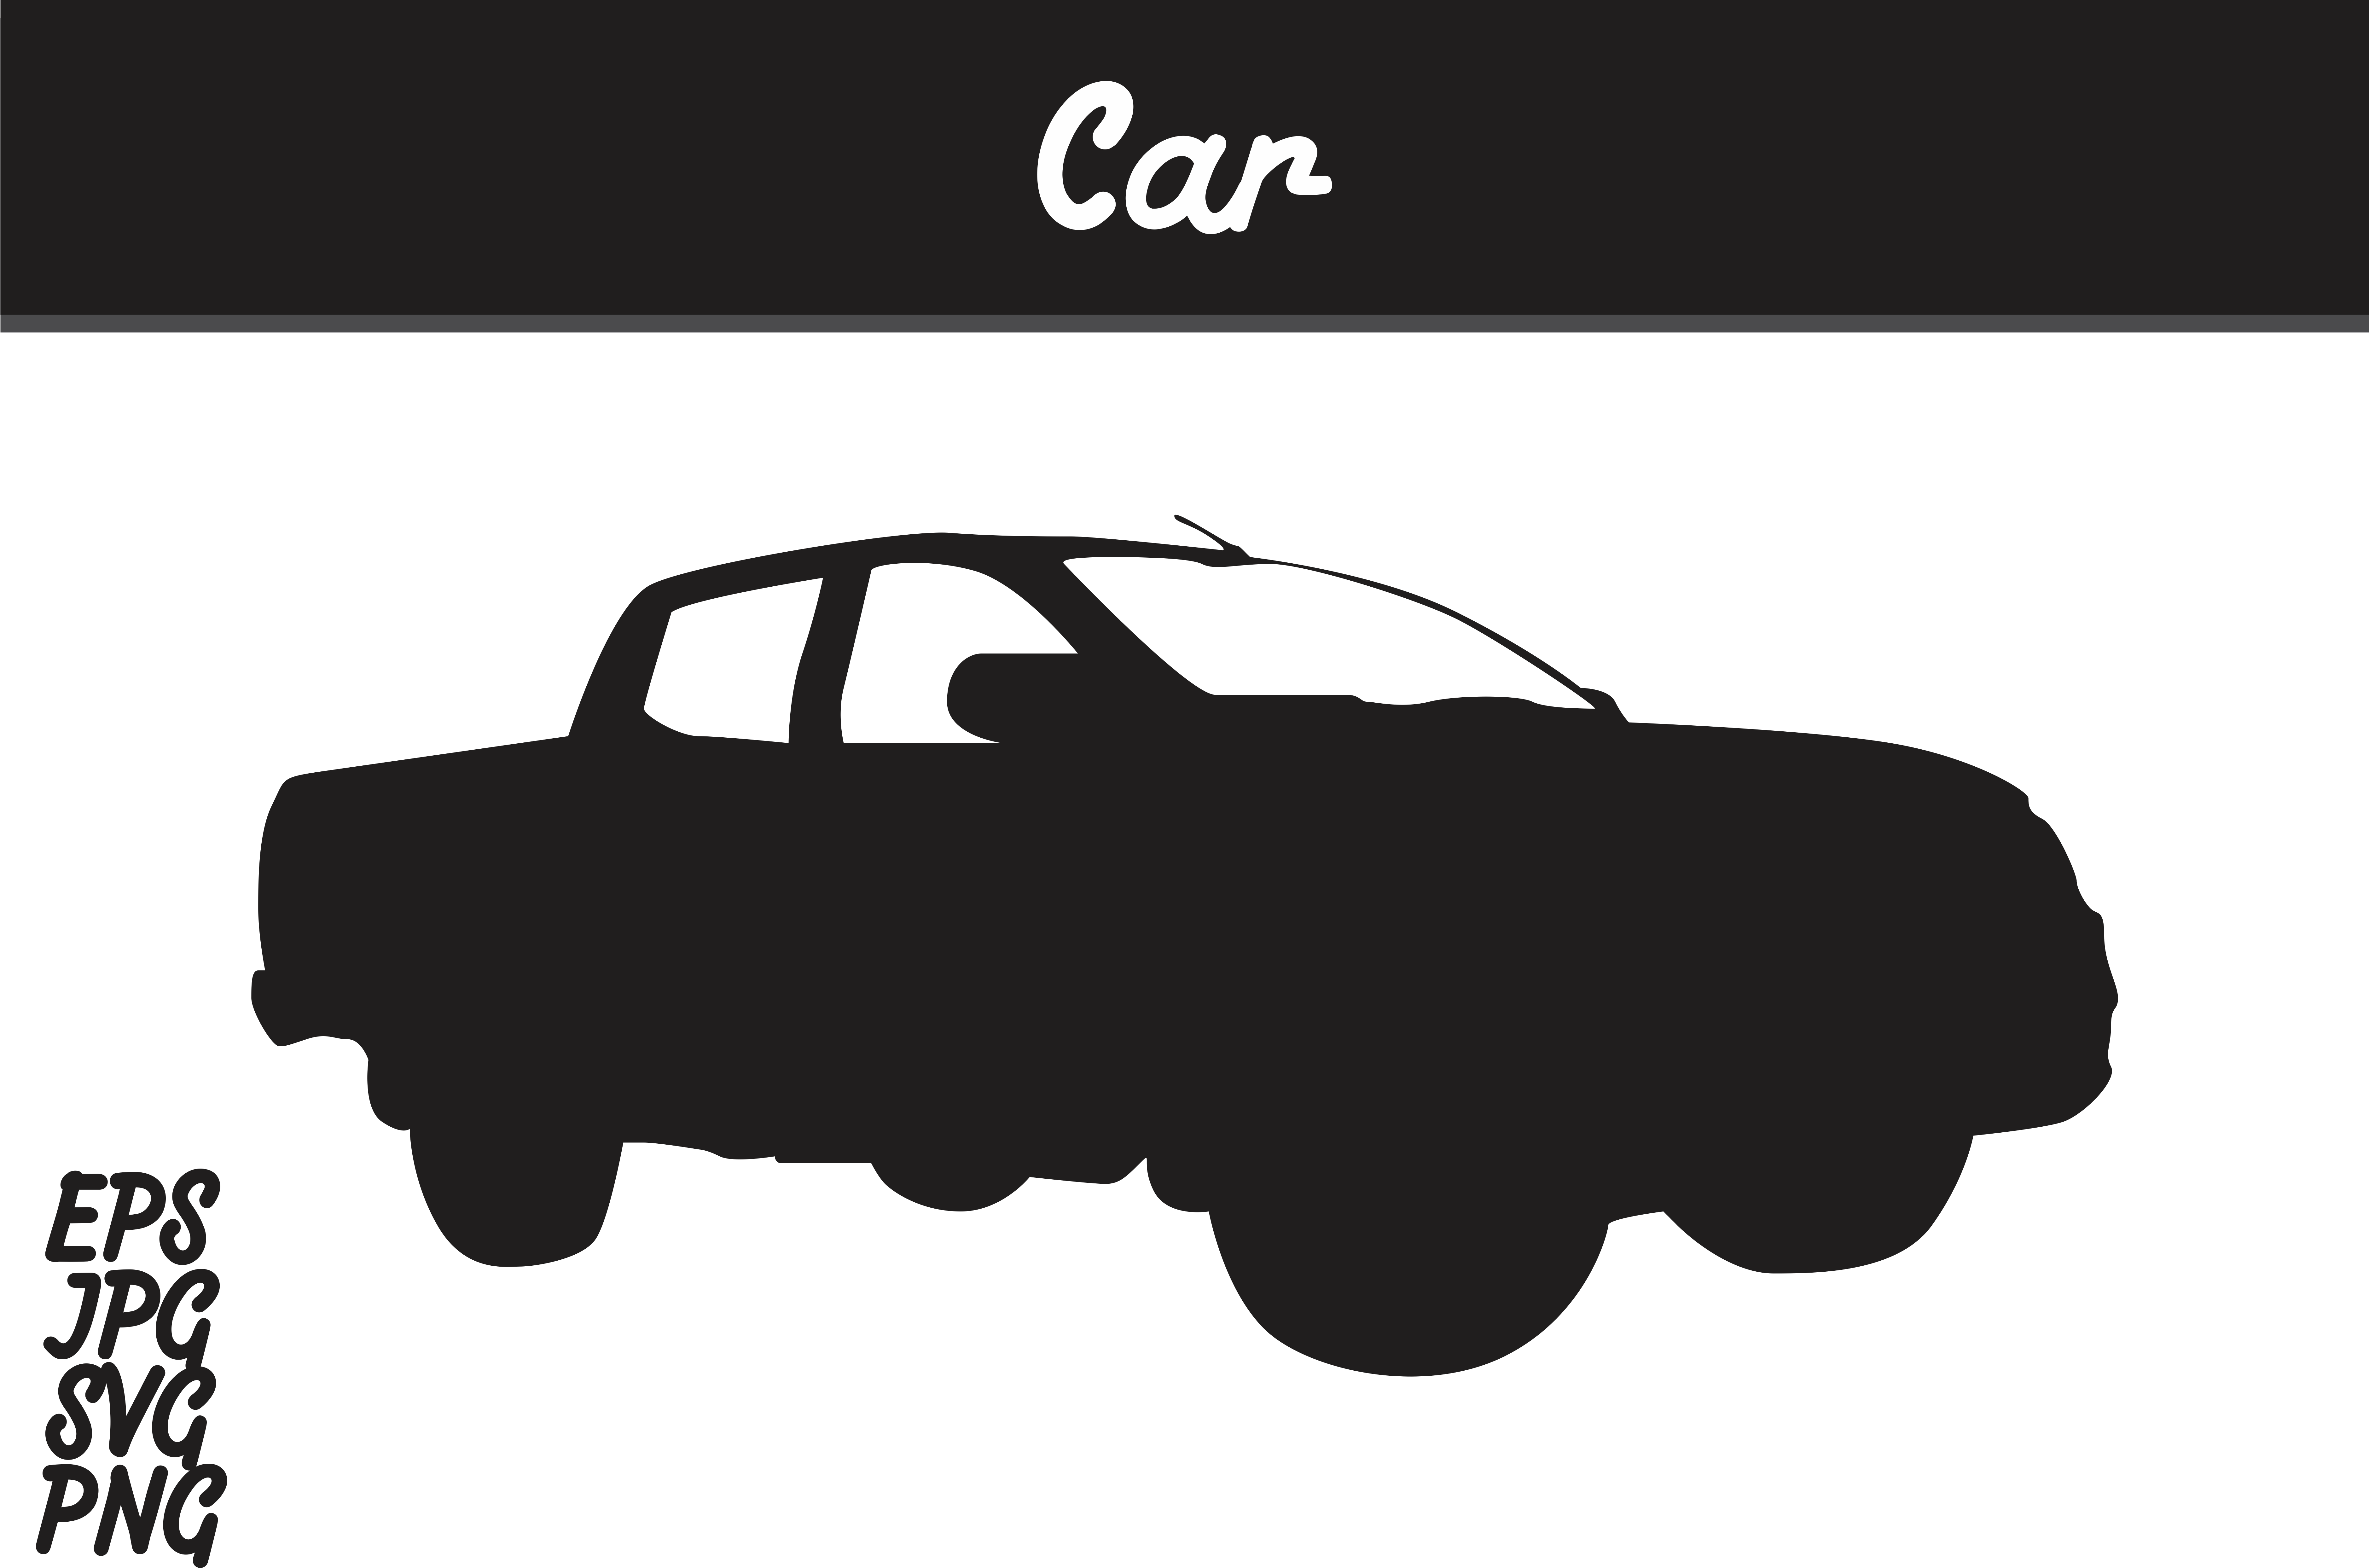 Car Silhouette Svg Vector Image Graphic By Arief